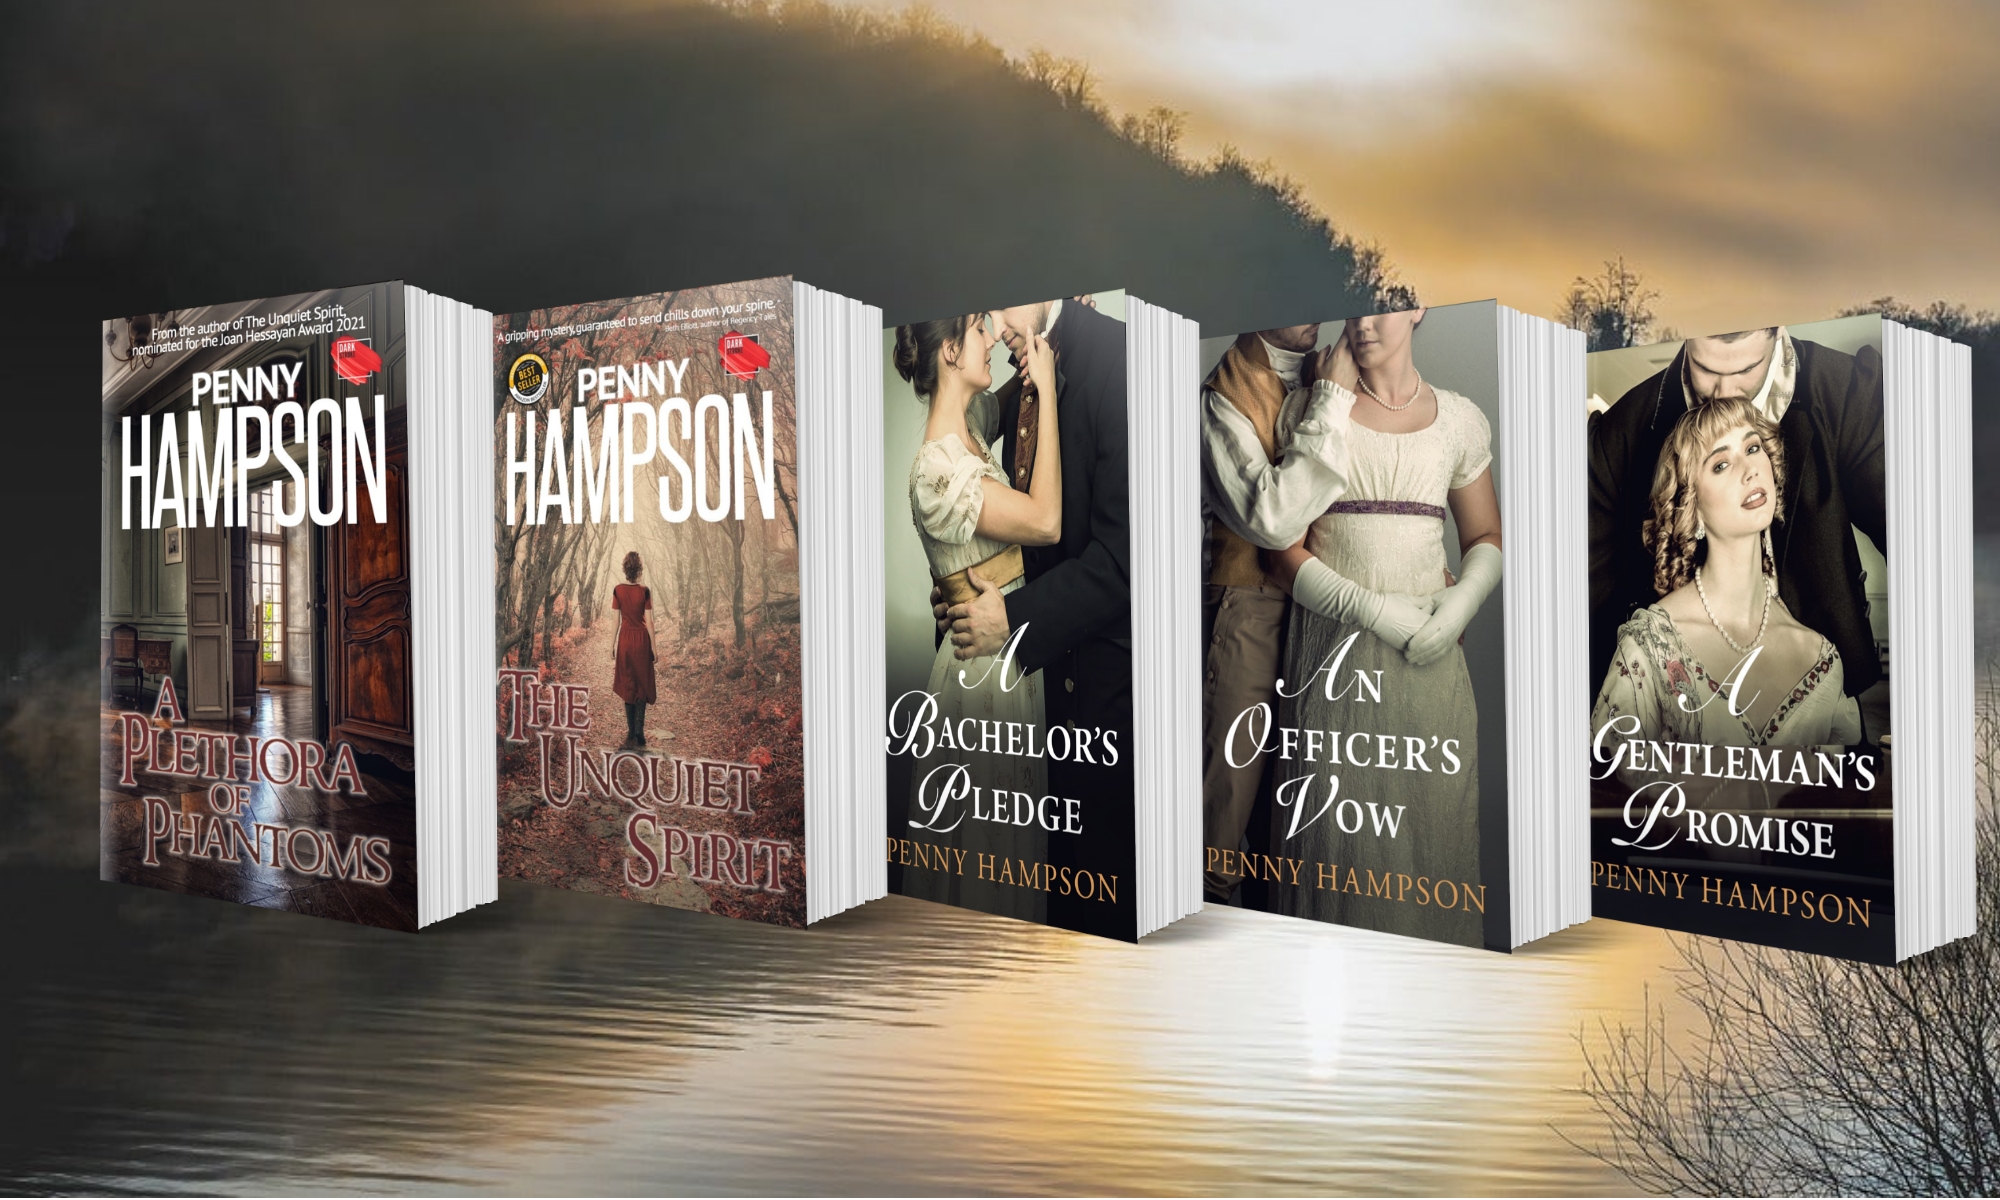 Penny Hampson - Writing History, Mystery, and .... a Touch of Romance